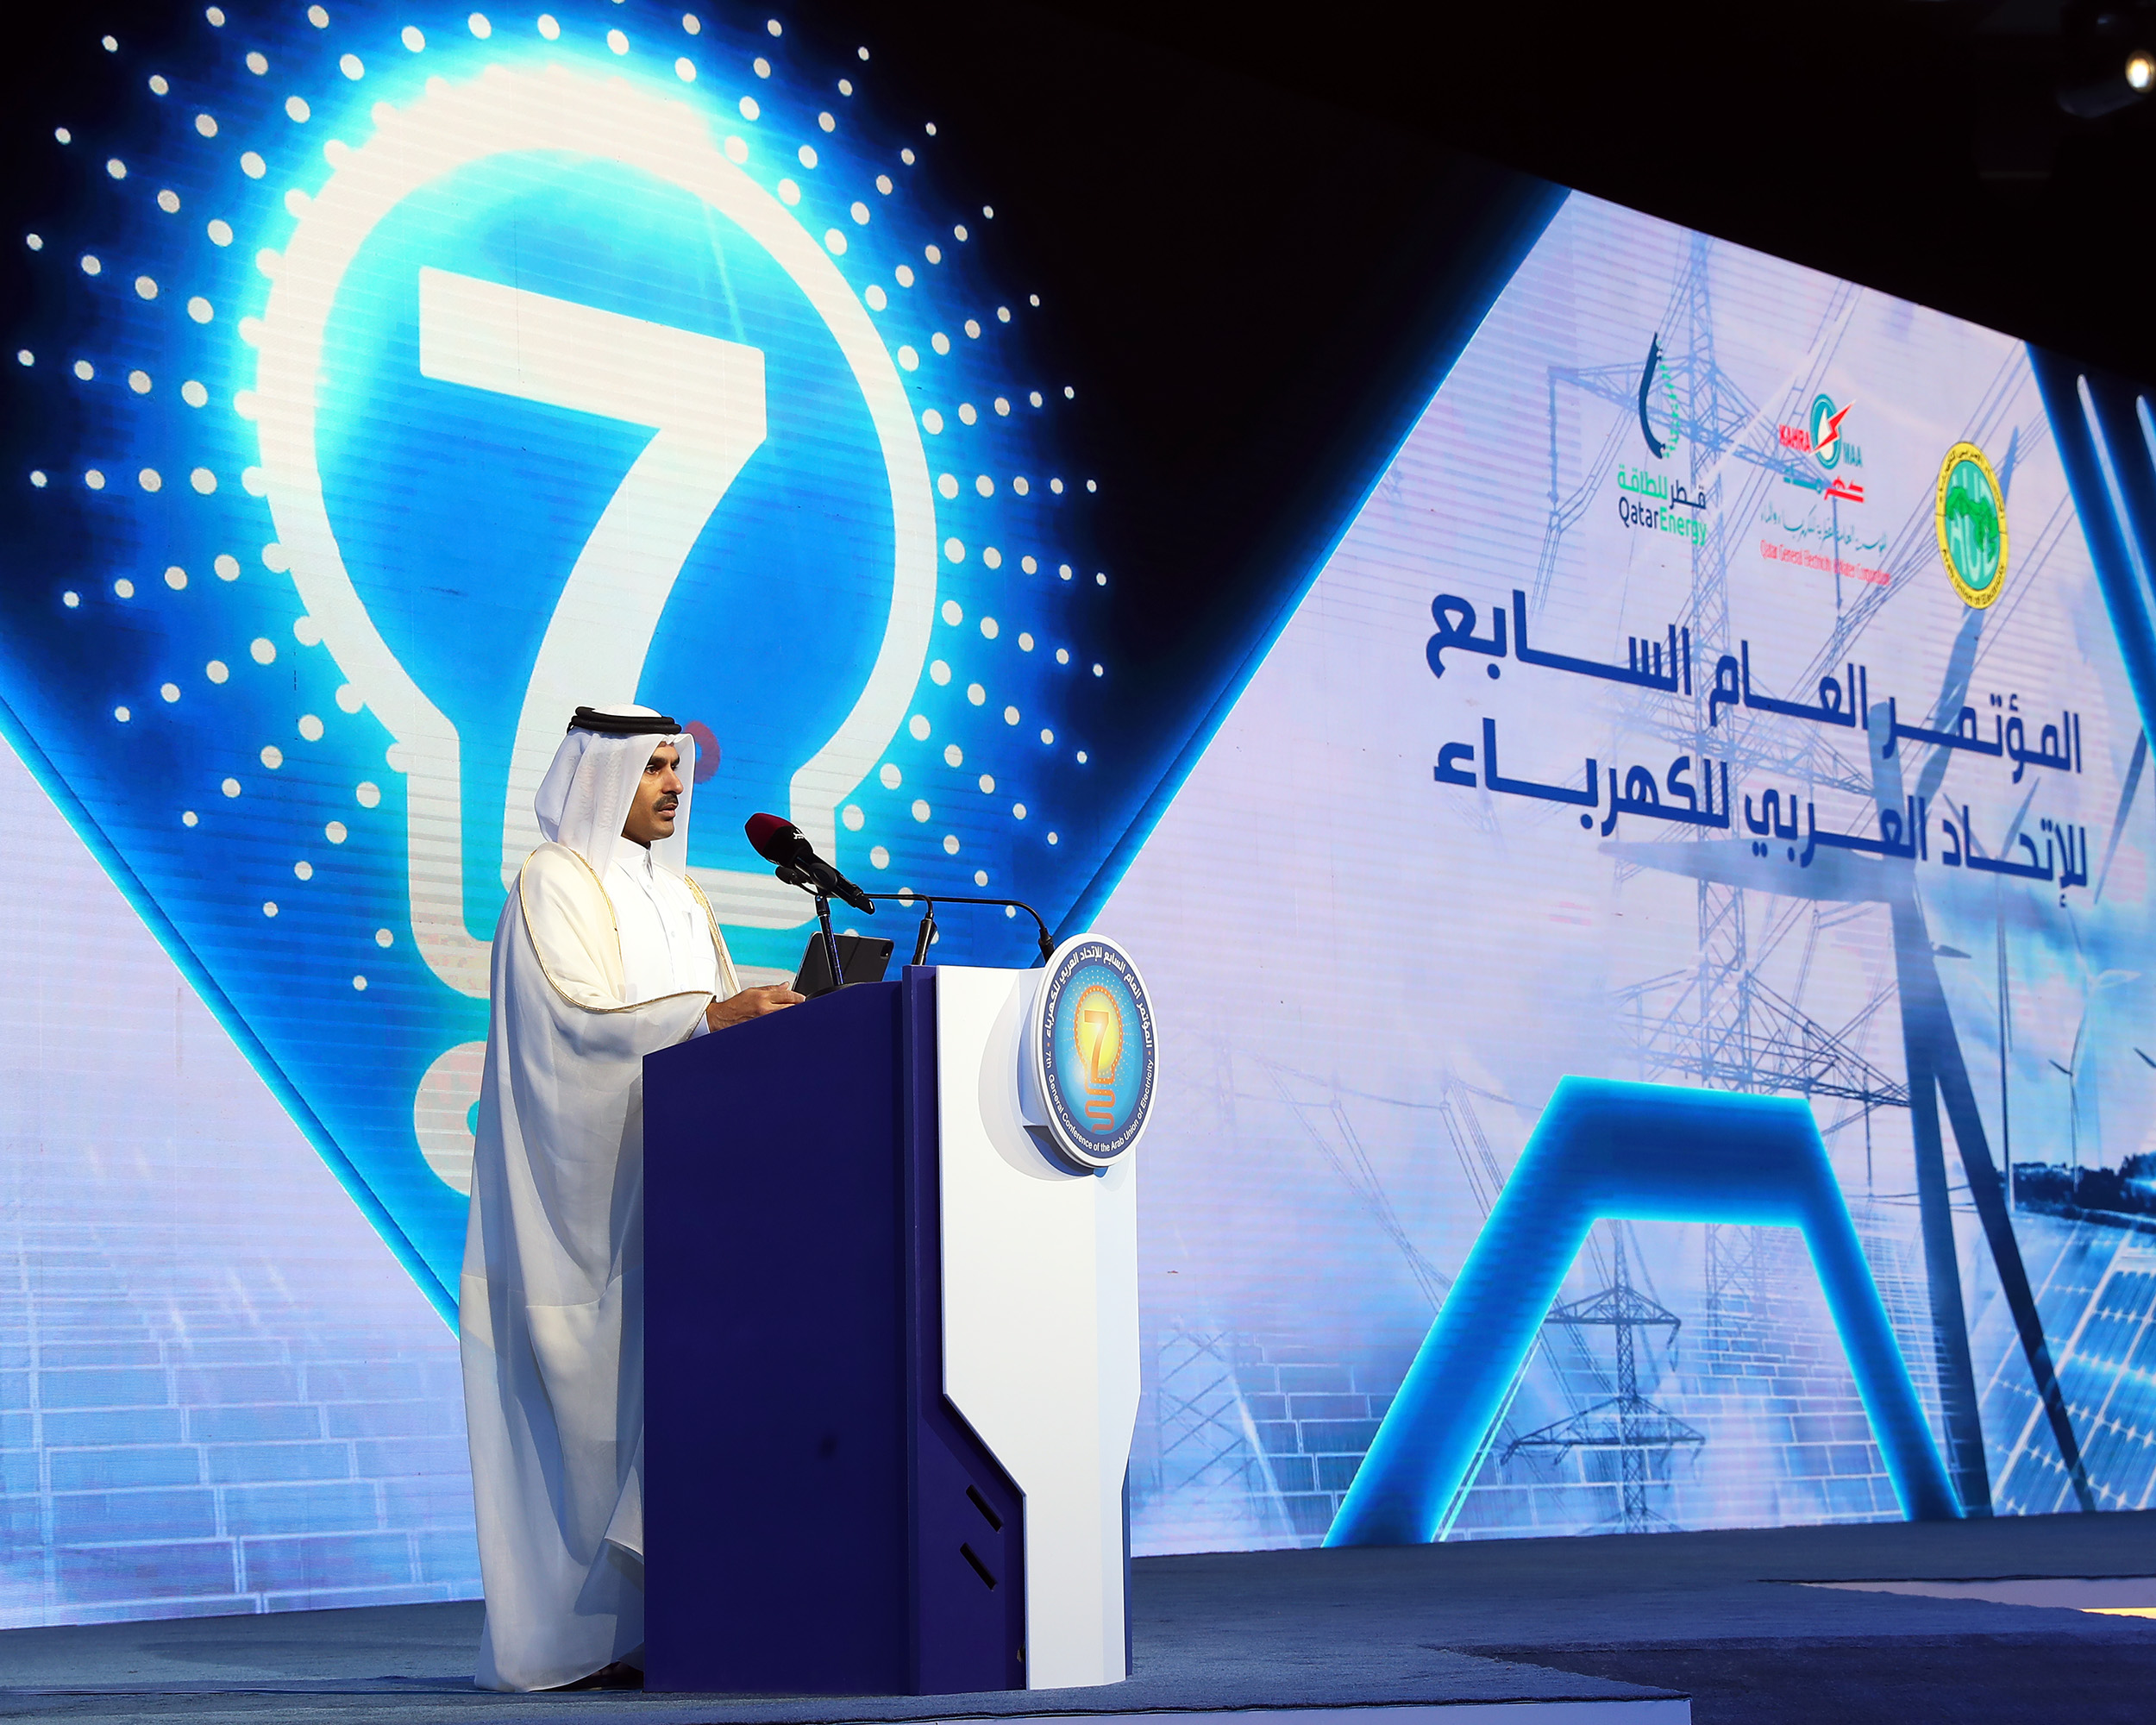 3rd International Conference on Smart Grid and Renewable Energy Opens in Doha